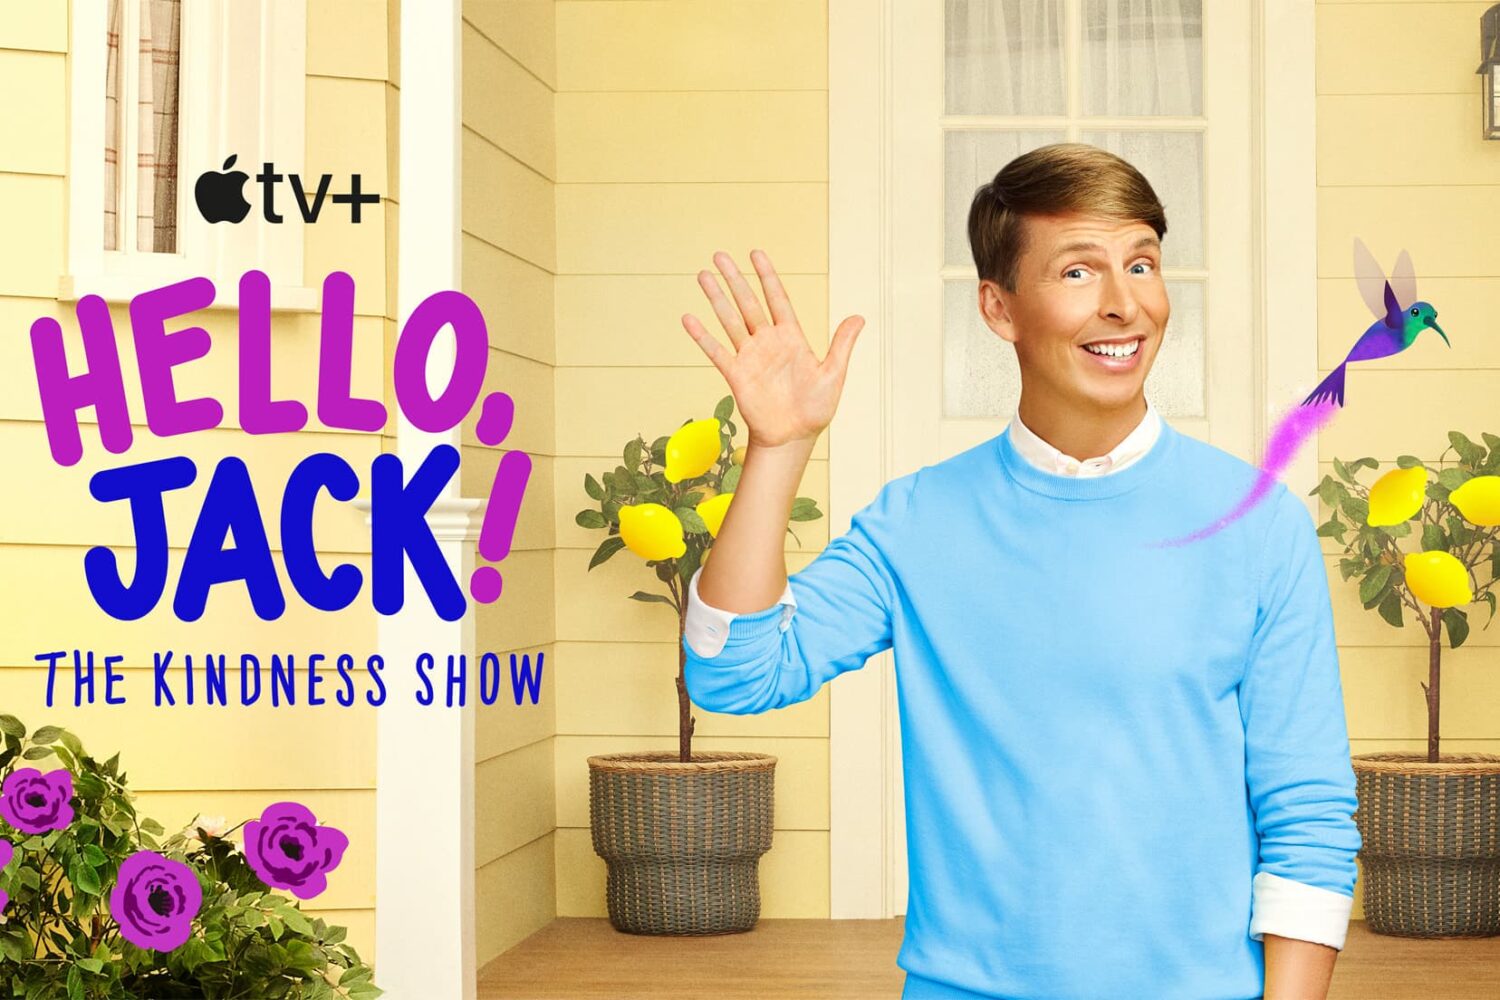 Poster artwork for the Apple TV+ kid-friendly show "Hello, Jack! The Kindness Show"